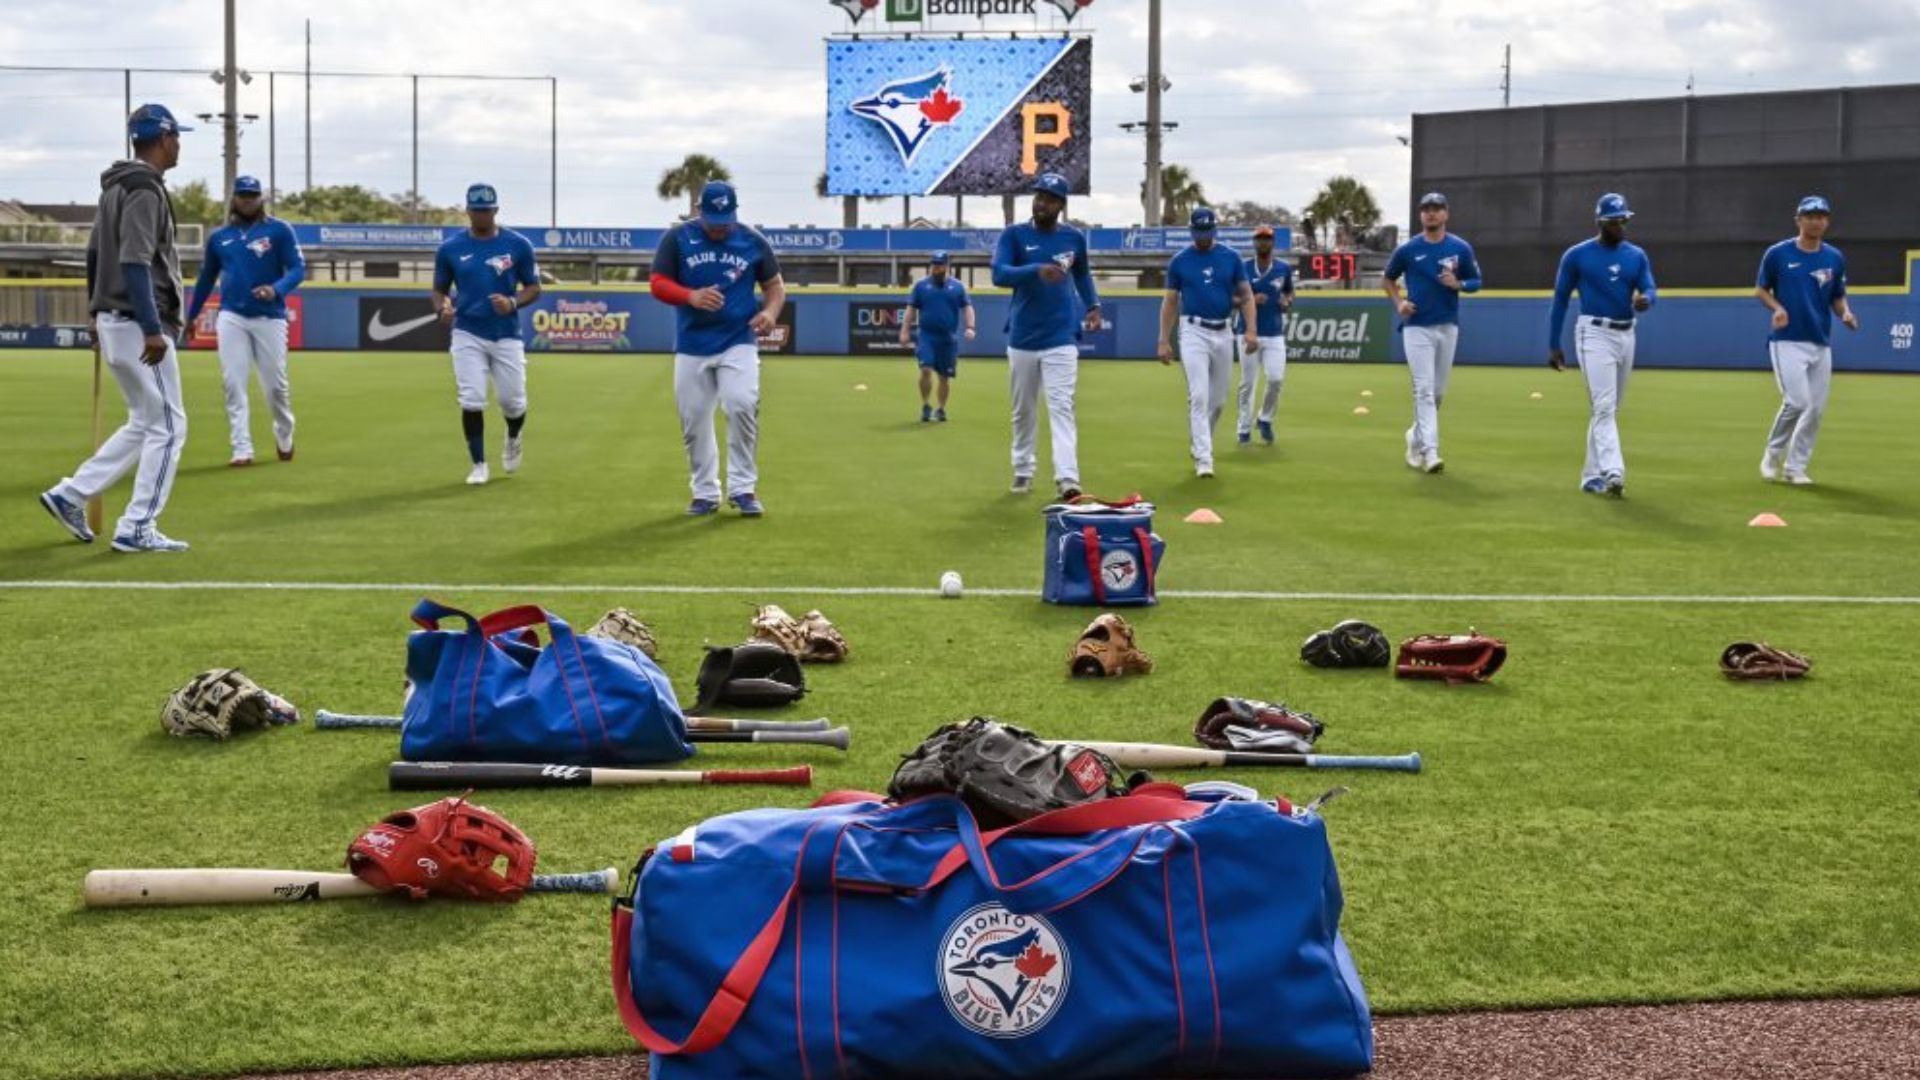 A look at how spring training is going for the Jays in Dunedin